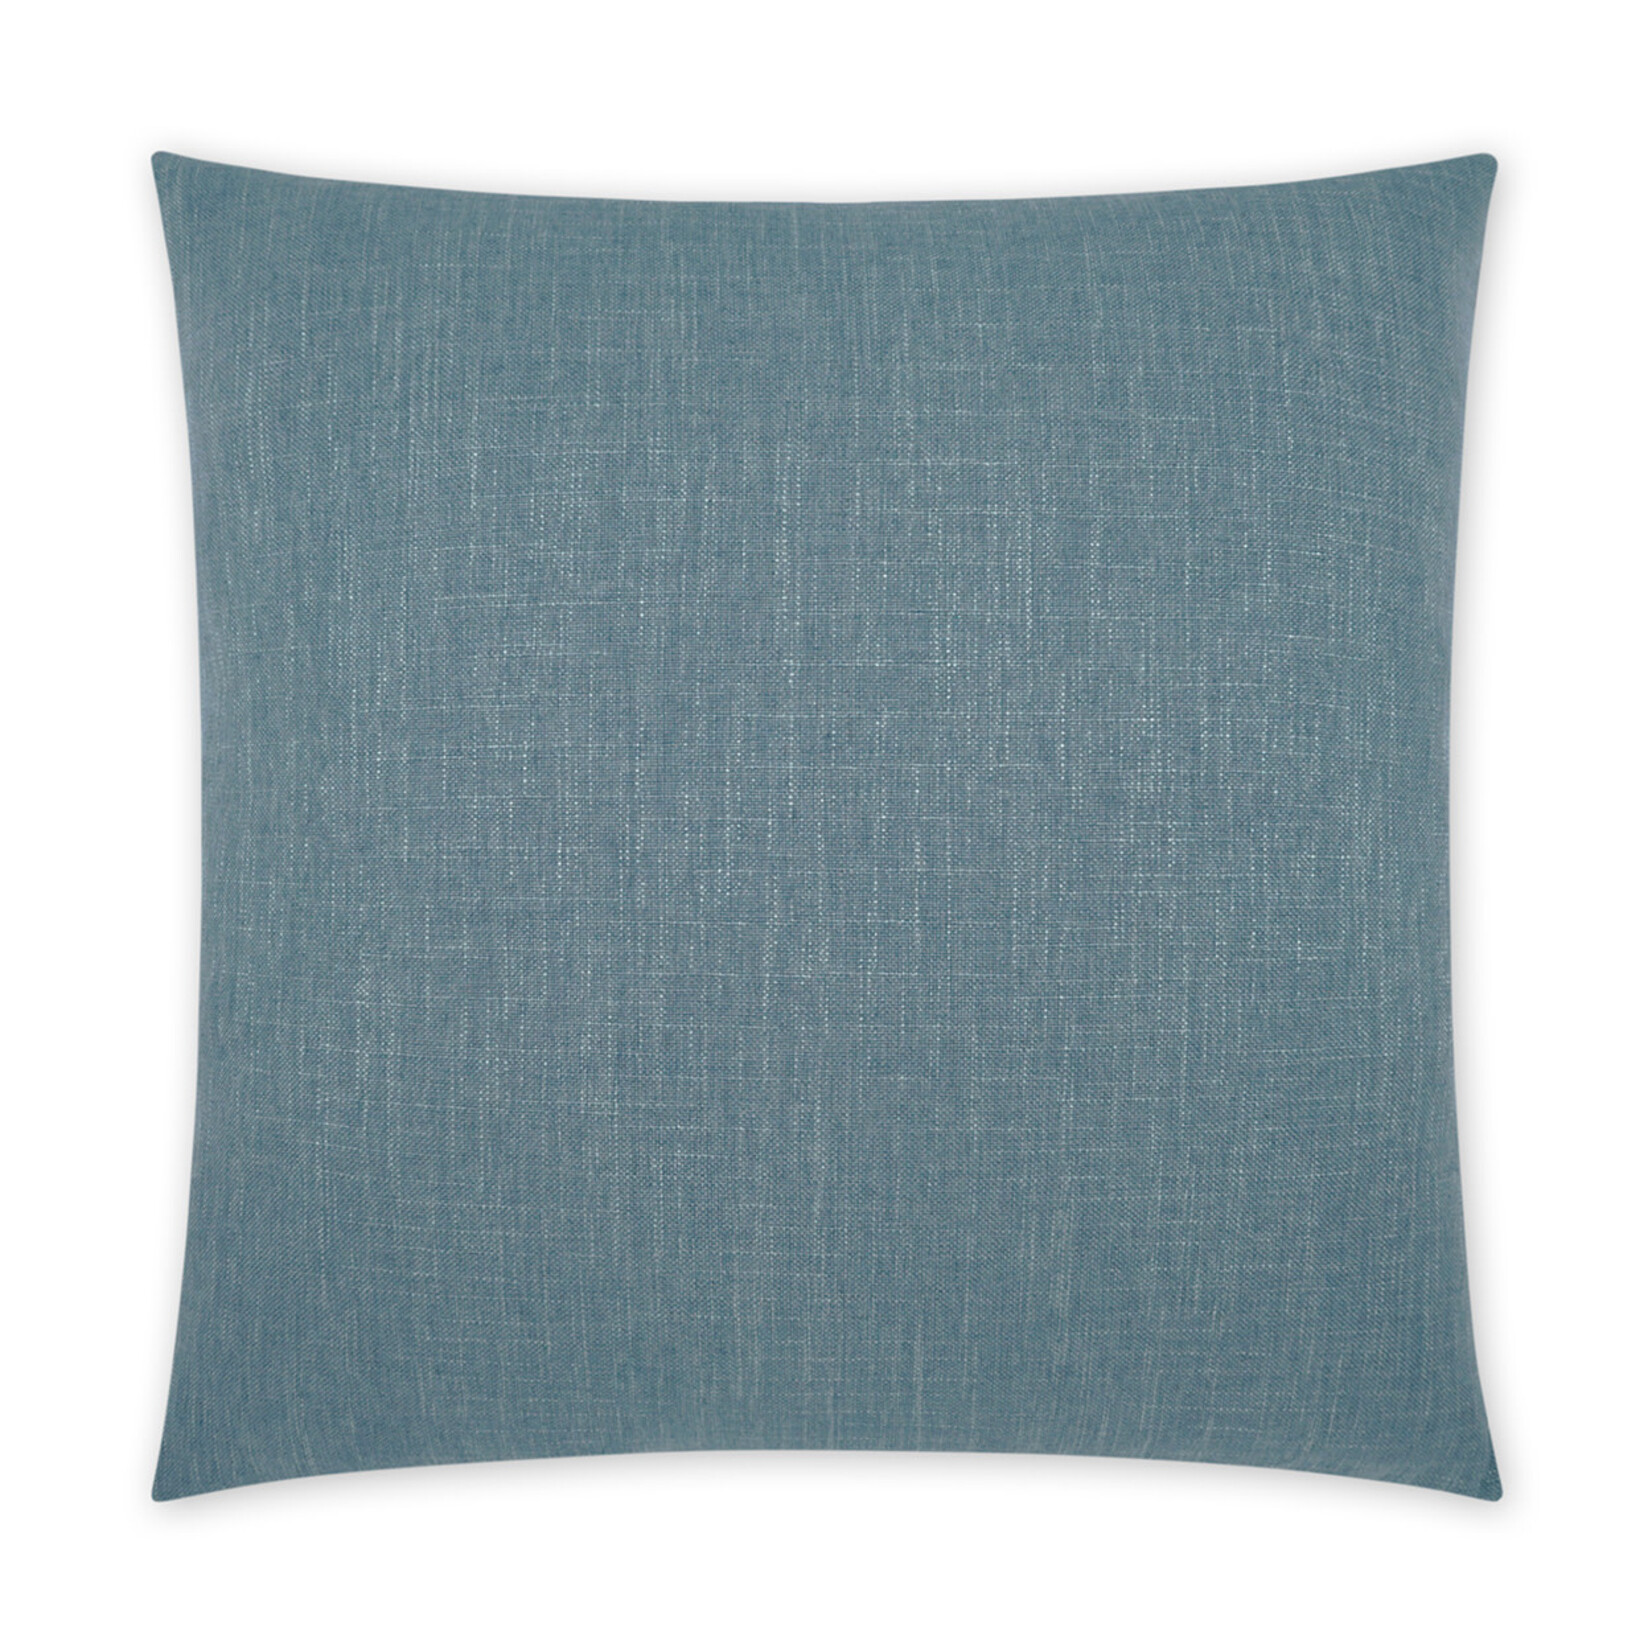 Outside The Box 24x24 Freeport Square Feather Down Pillow